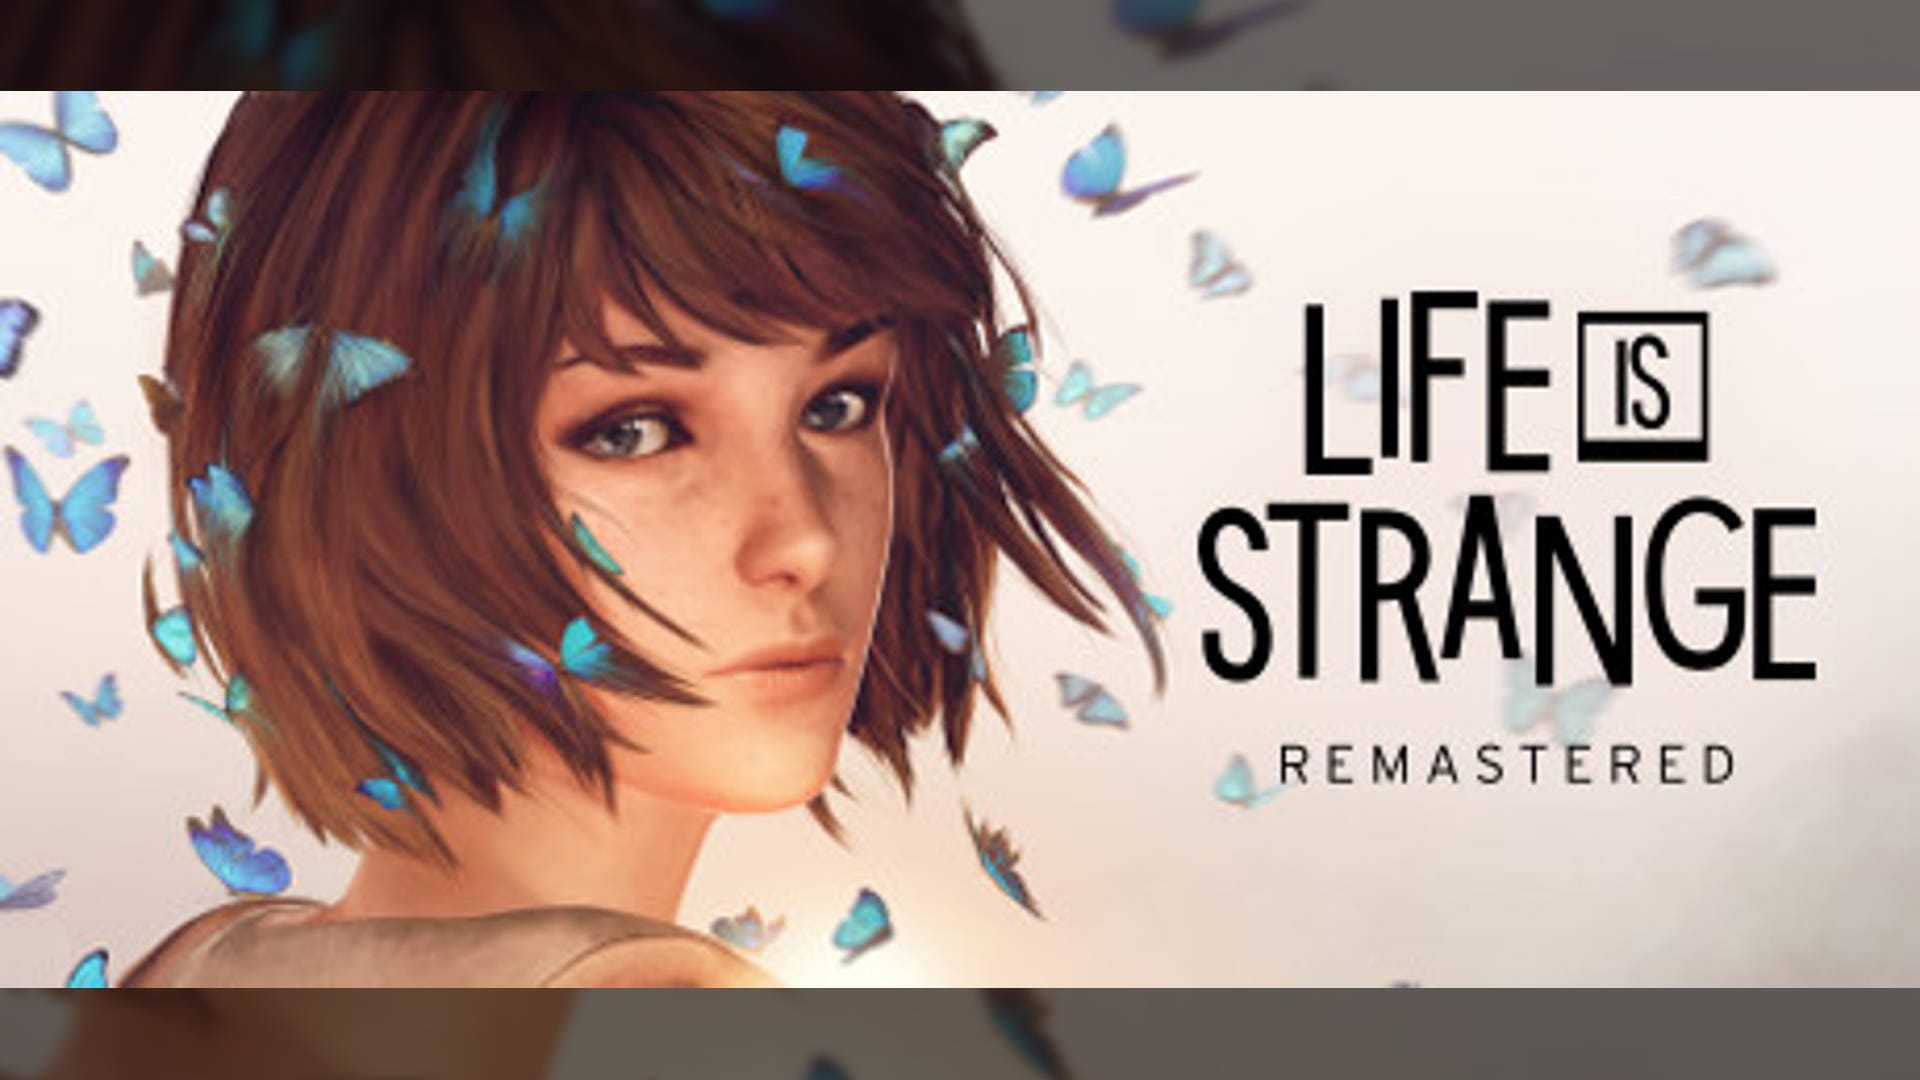 Life is life год. Life is Strange Remastered collection. Life and Strange ремастер. Life is Strange Remastered Макс. Life is Strange 1.